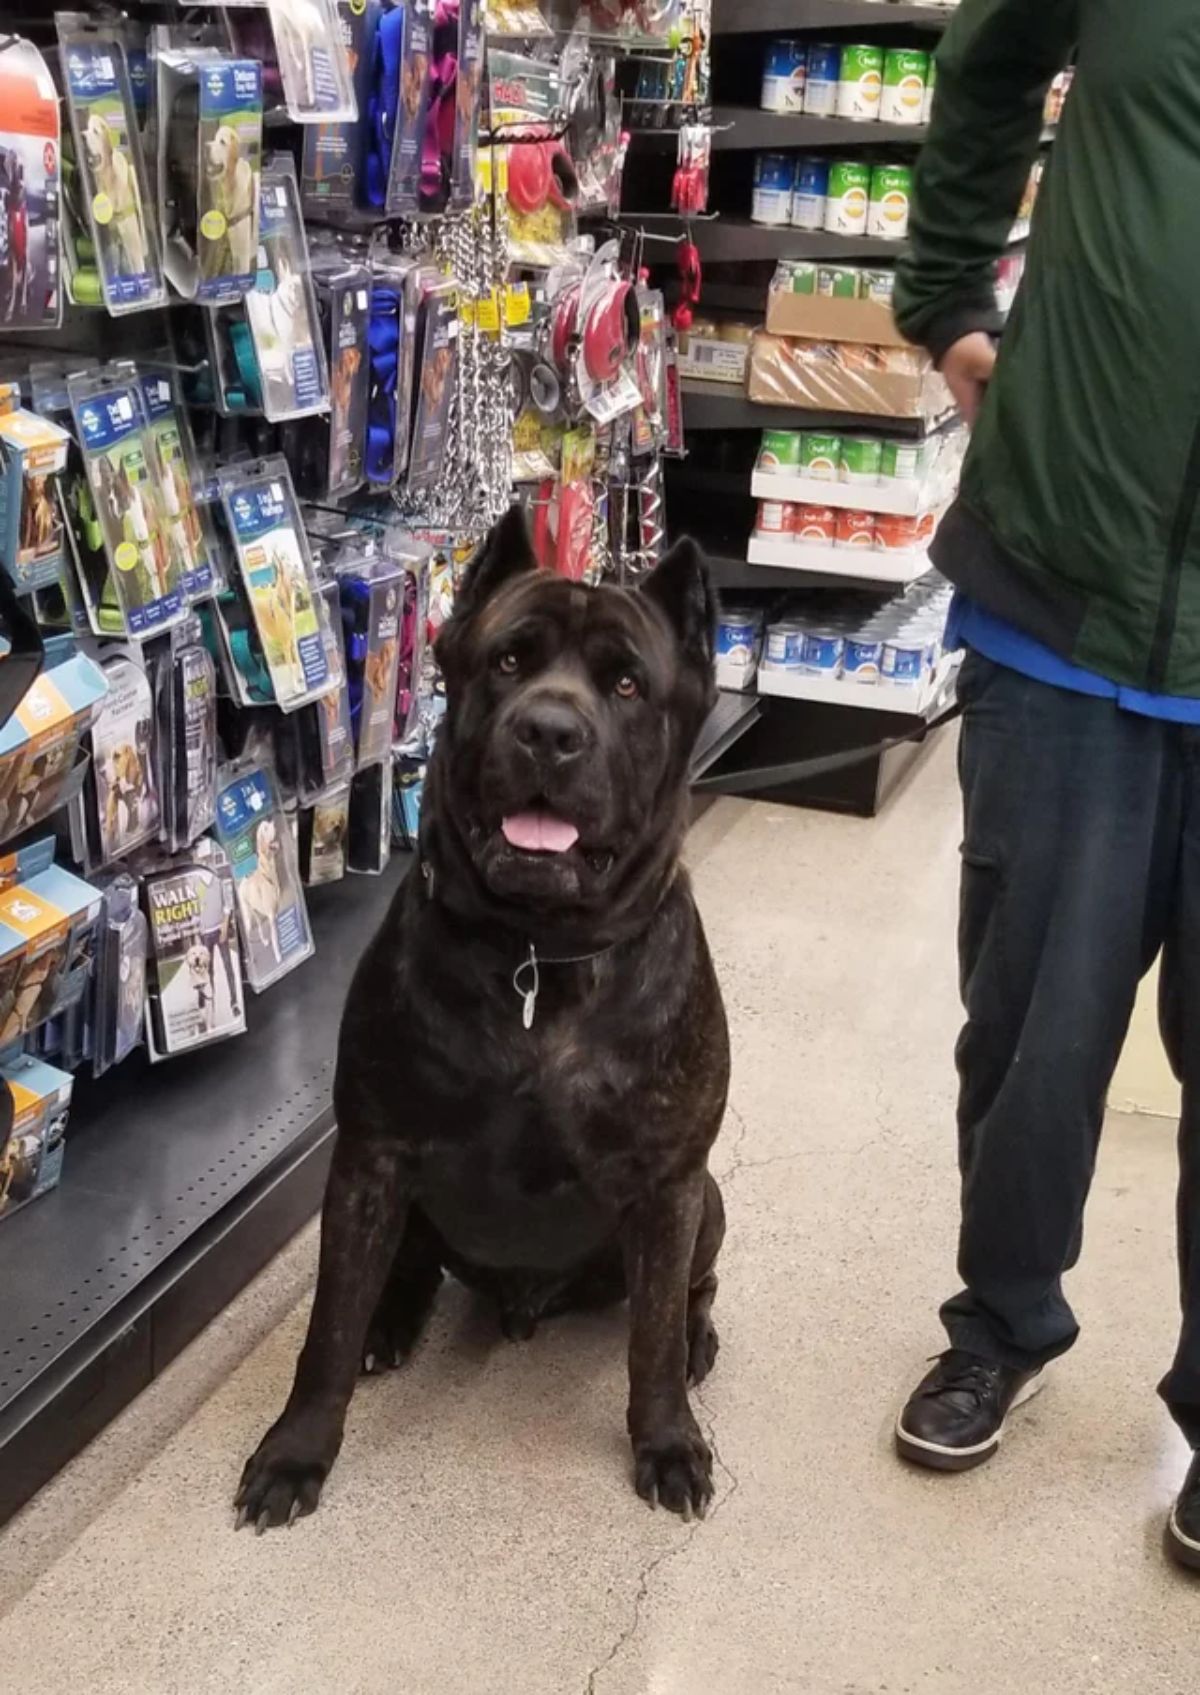 large black dog on a leash next to a person in a store